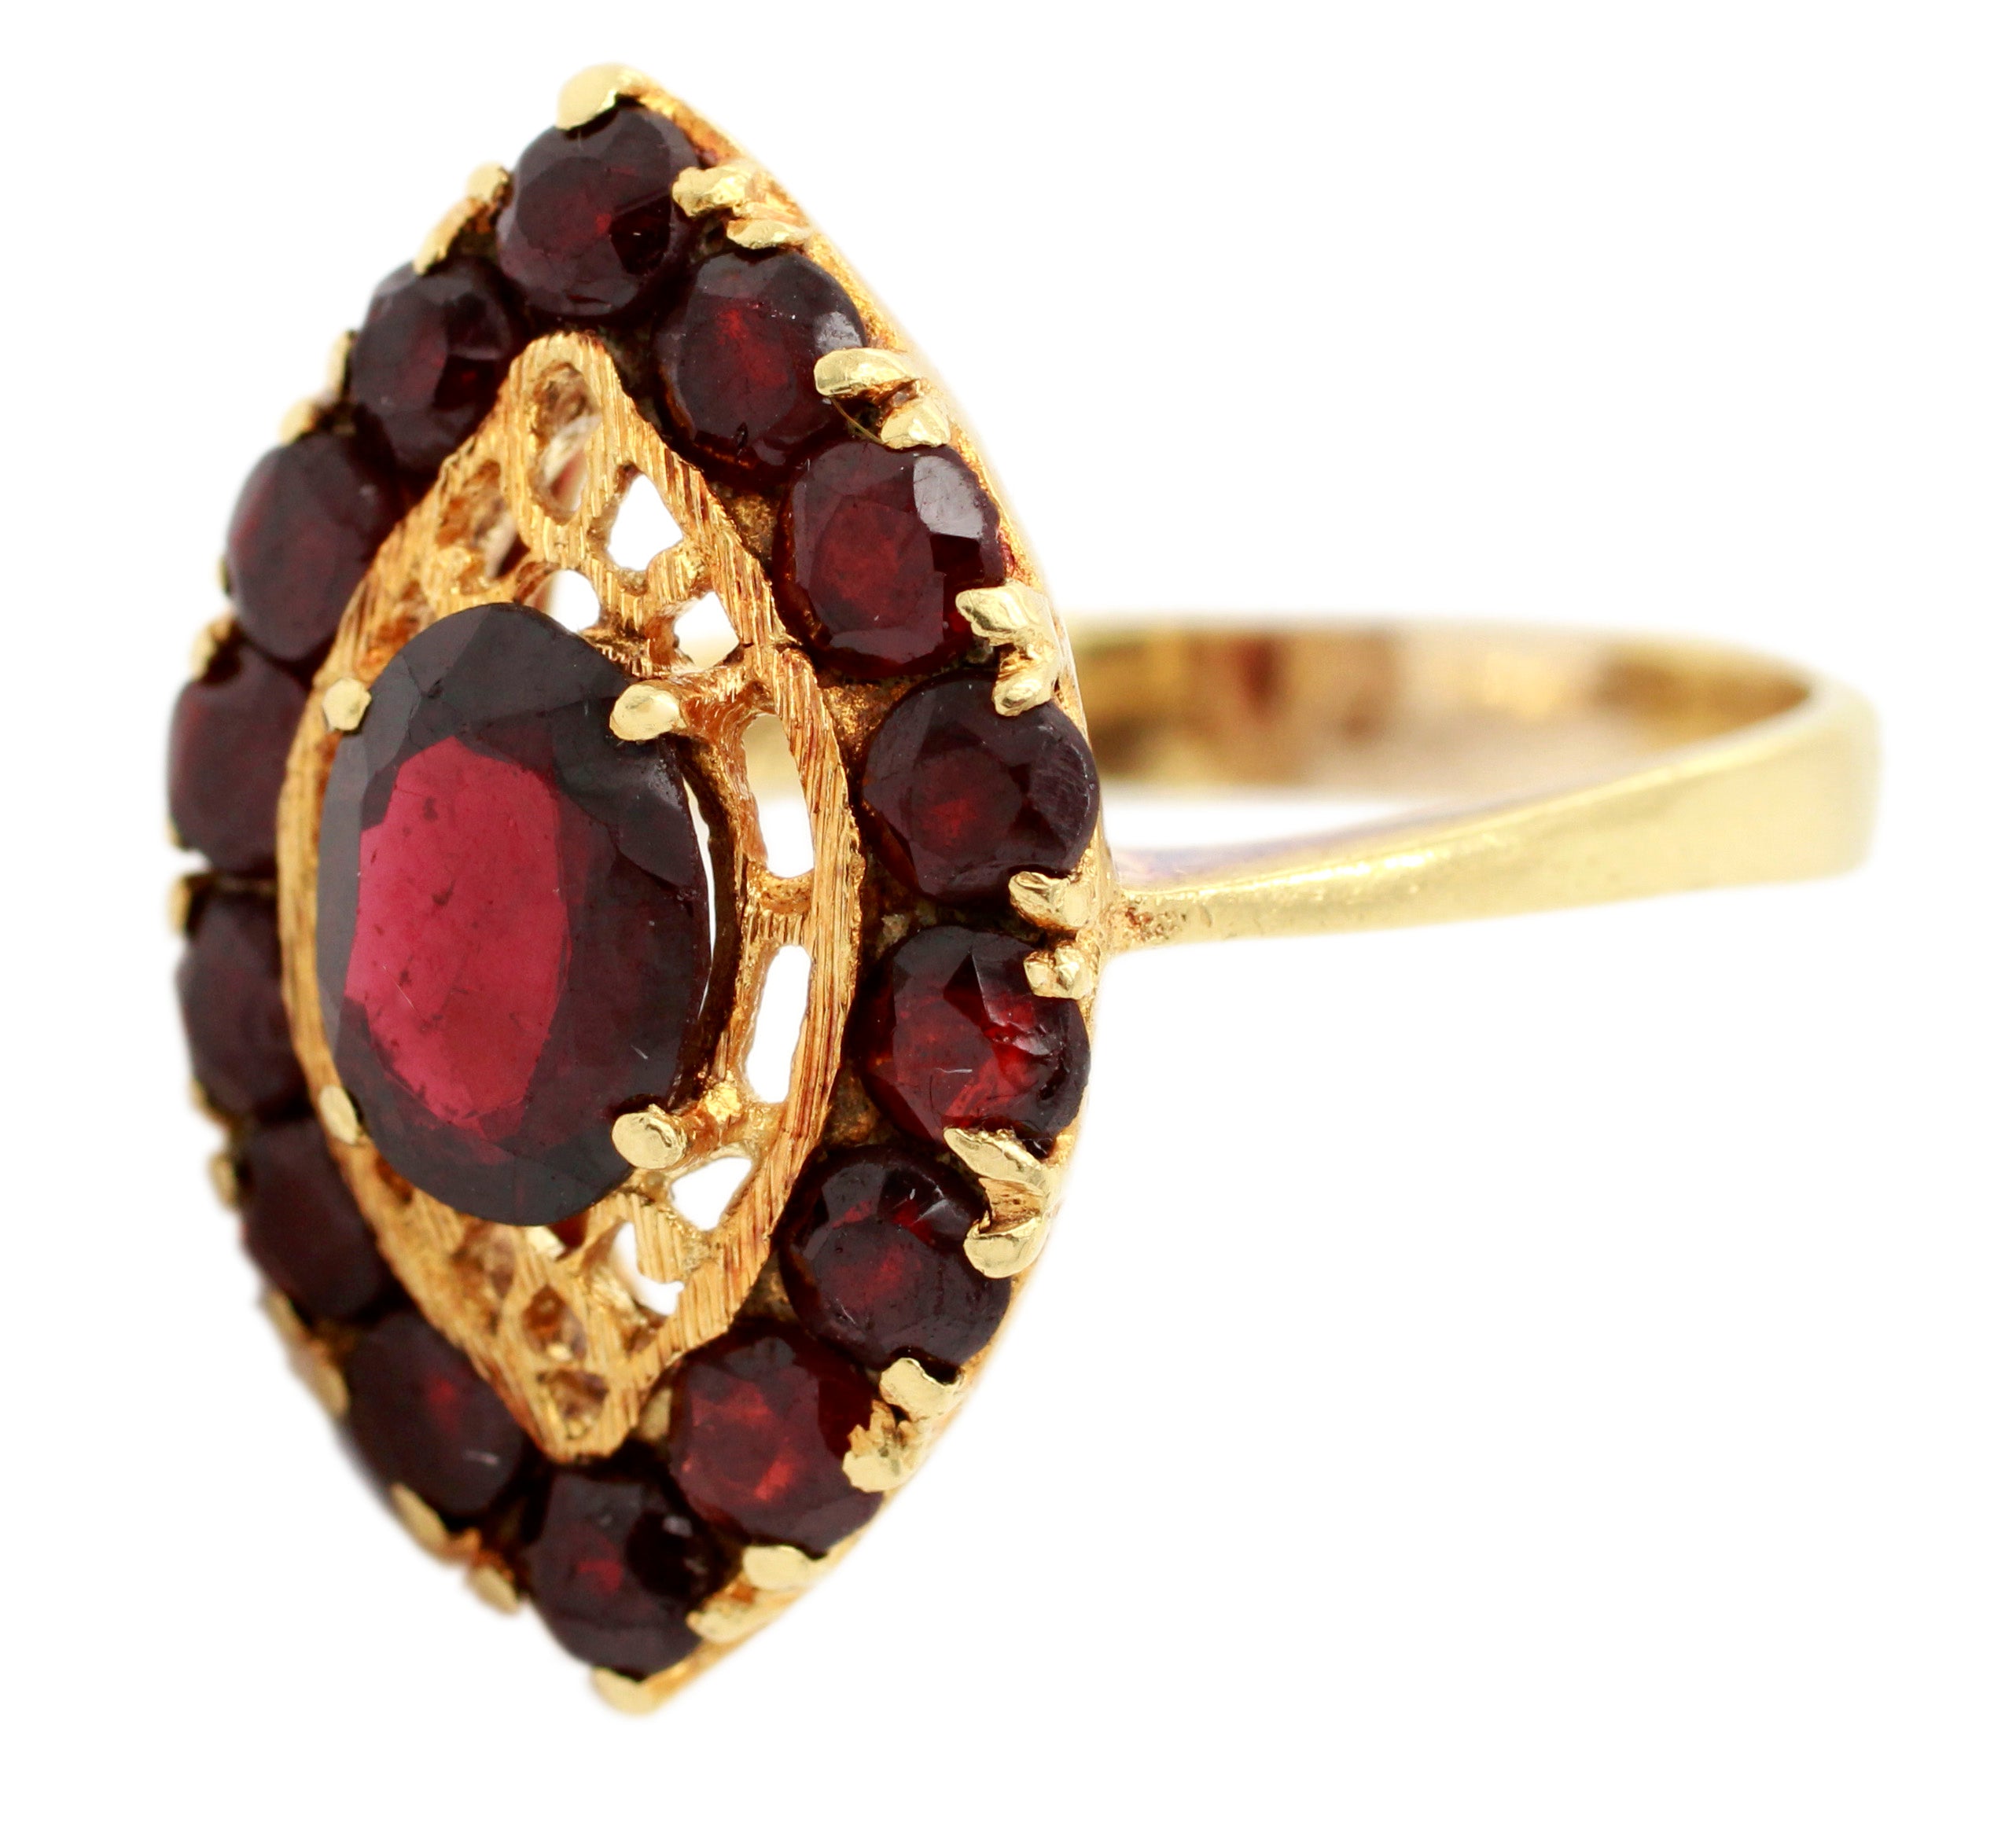 Antique Art Deco 2.60ctw Marquise Garnet Cocktail Ring - 18k Yellow Gold Size 9